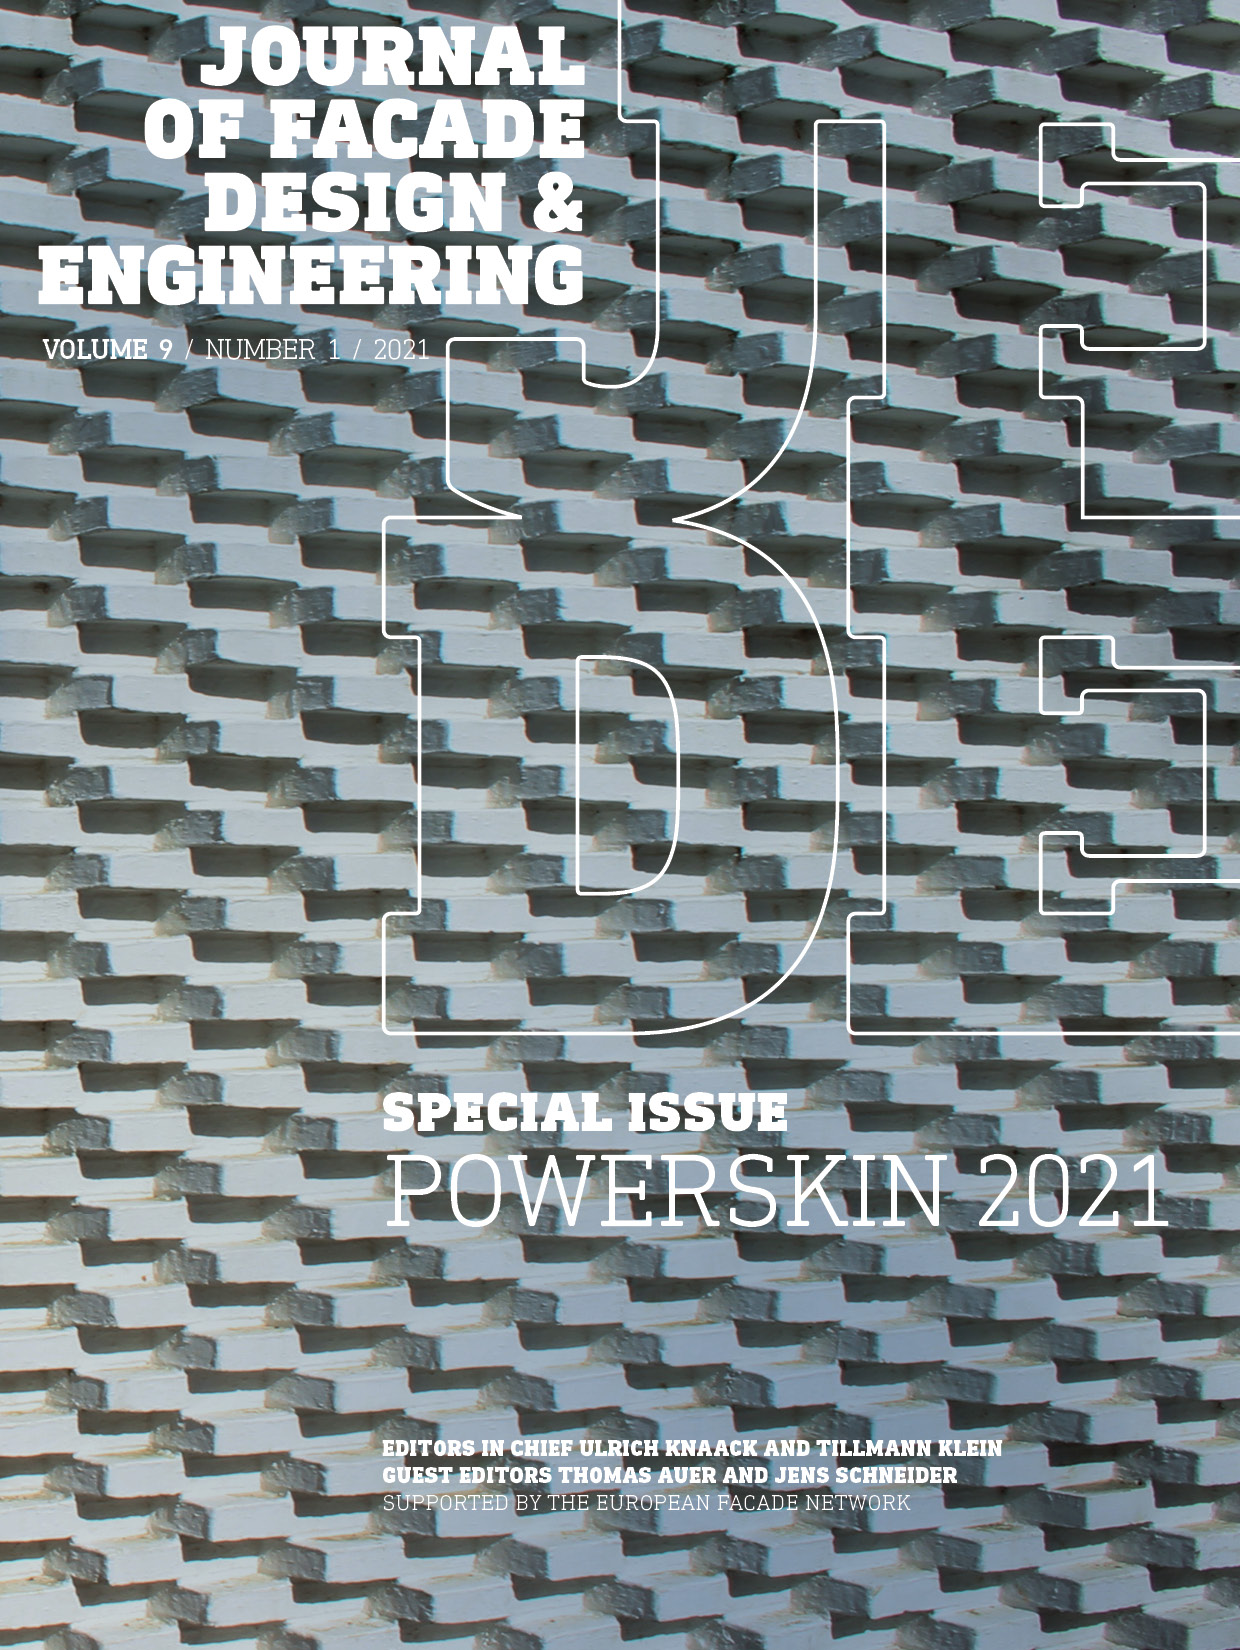 						View Vol. 9 No. 1 (2021): Special Issue Powerskin 2021
					